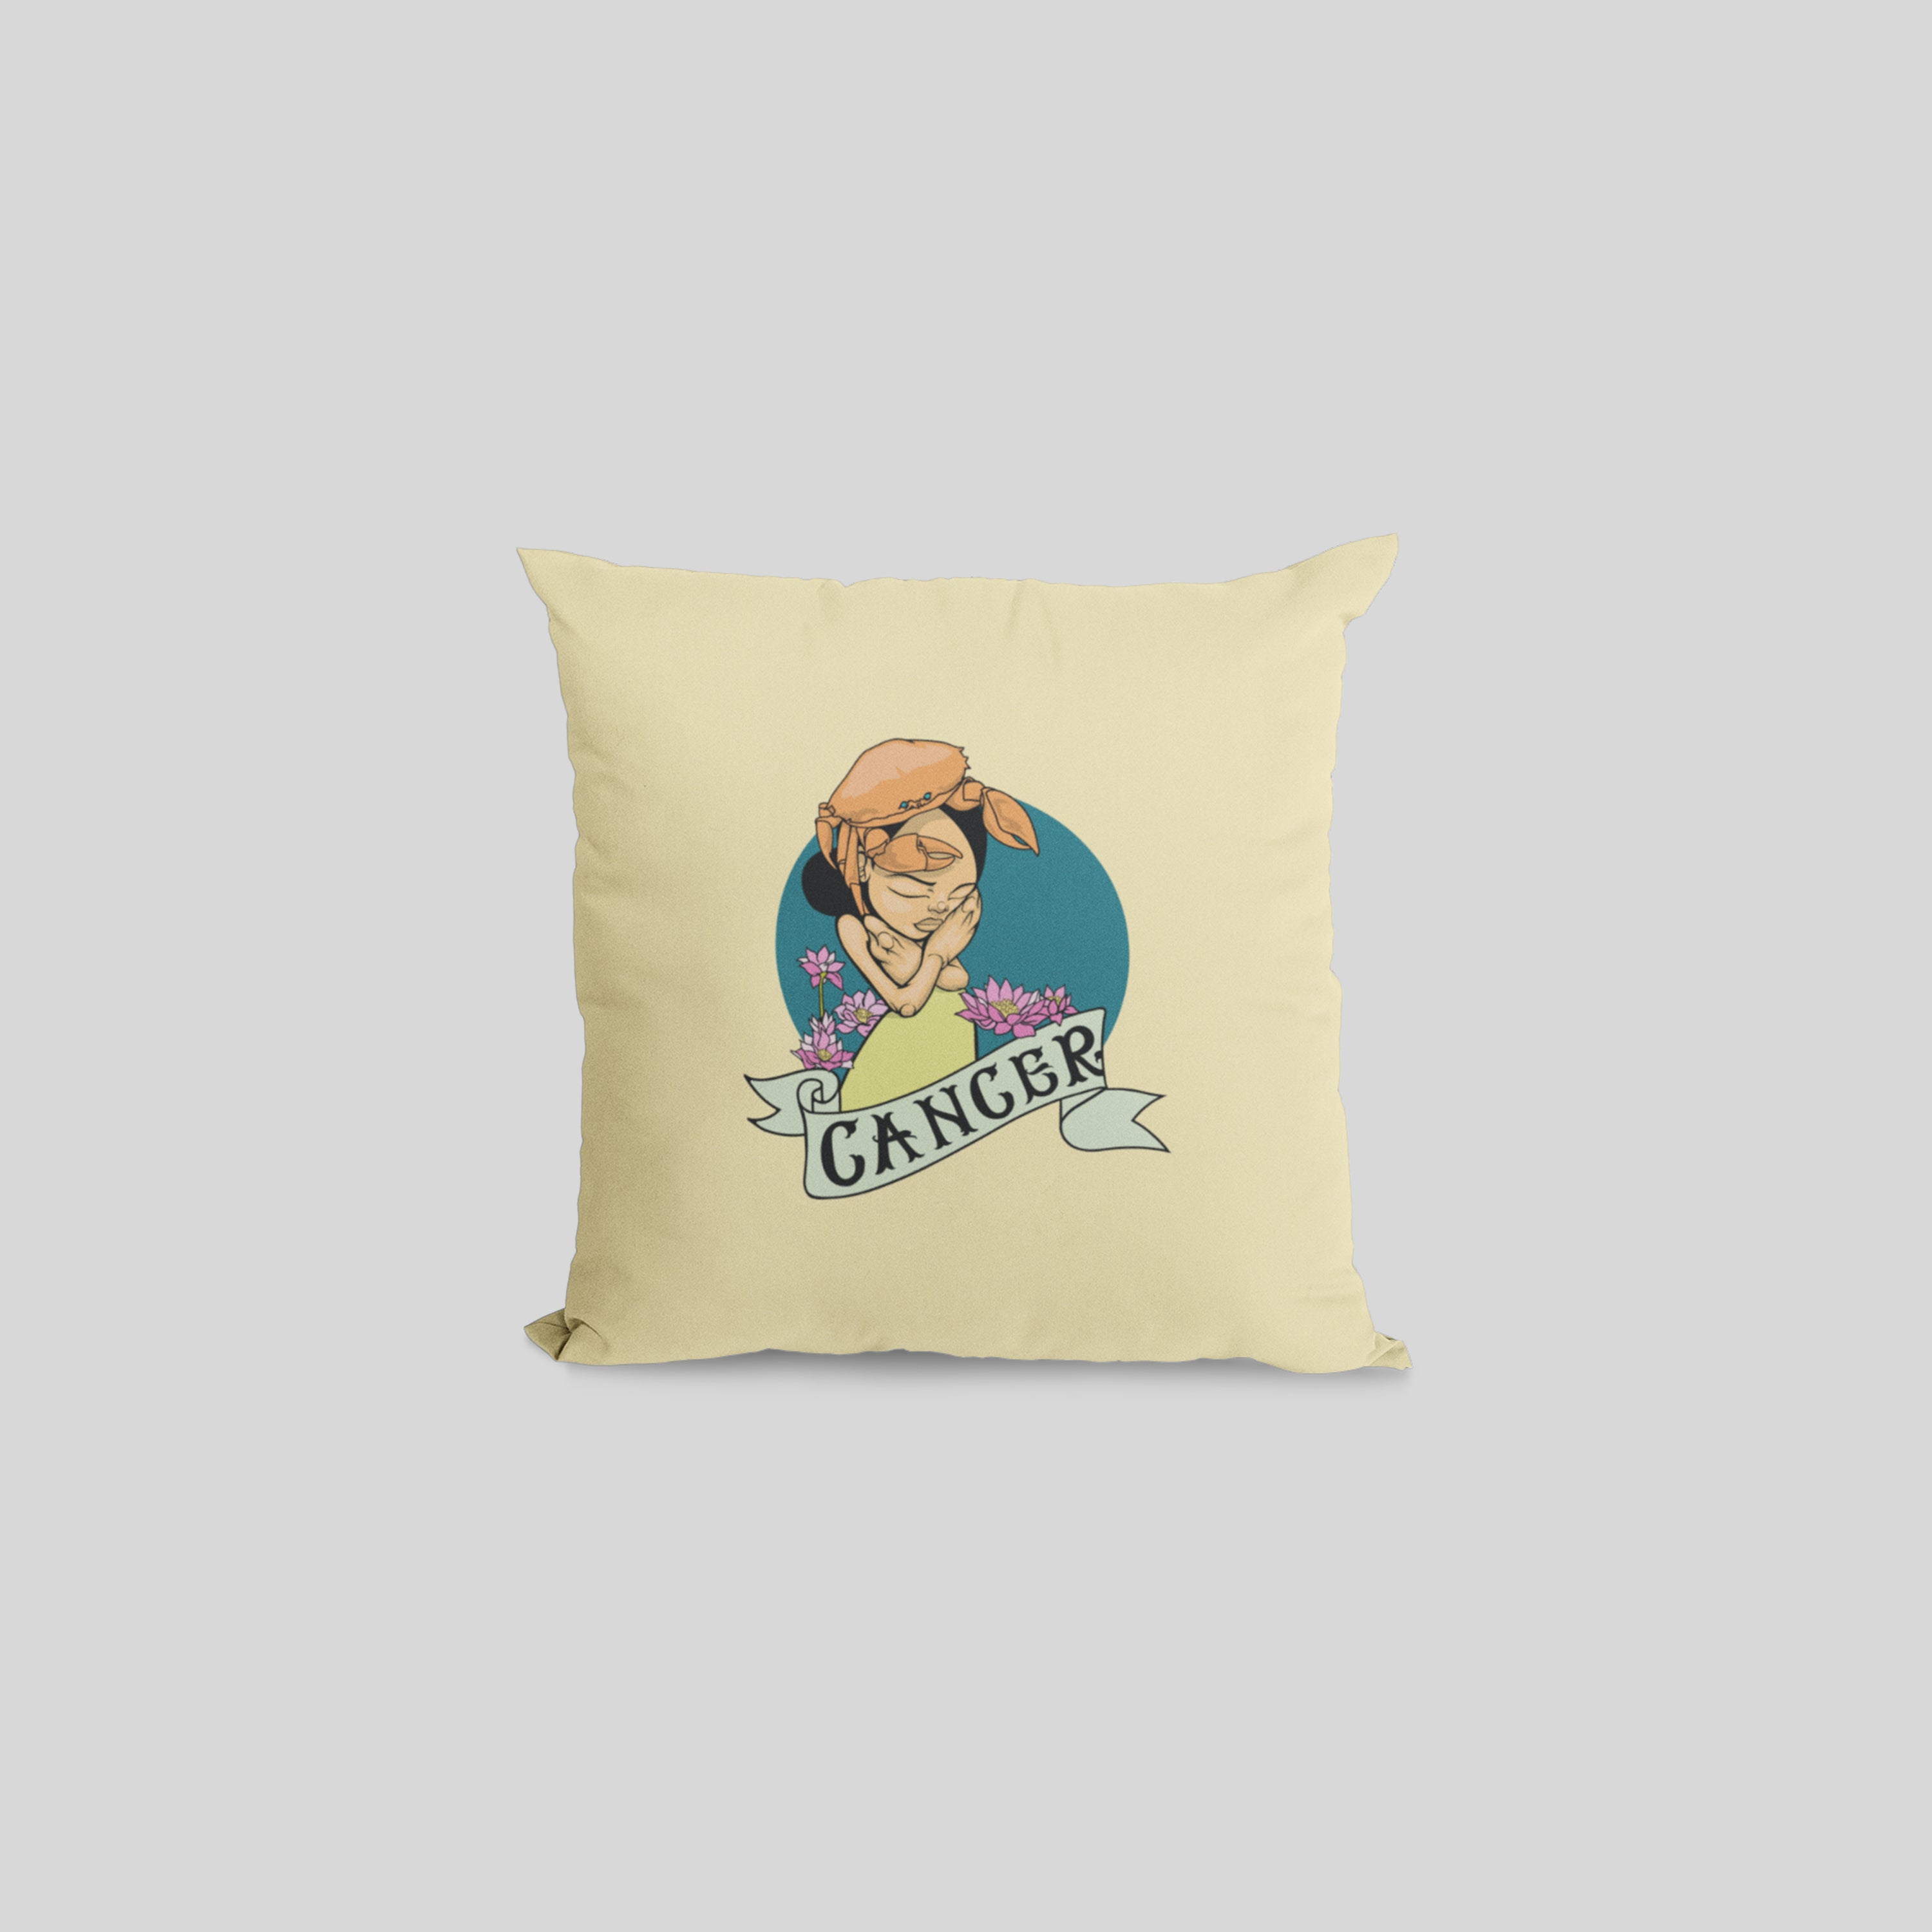 CANCER BY SAM FLORES PILLOW COVER